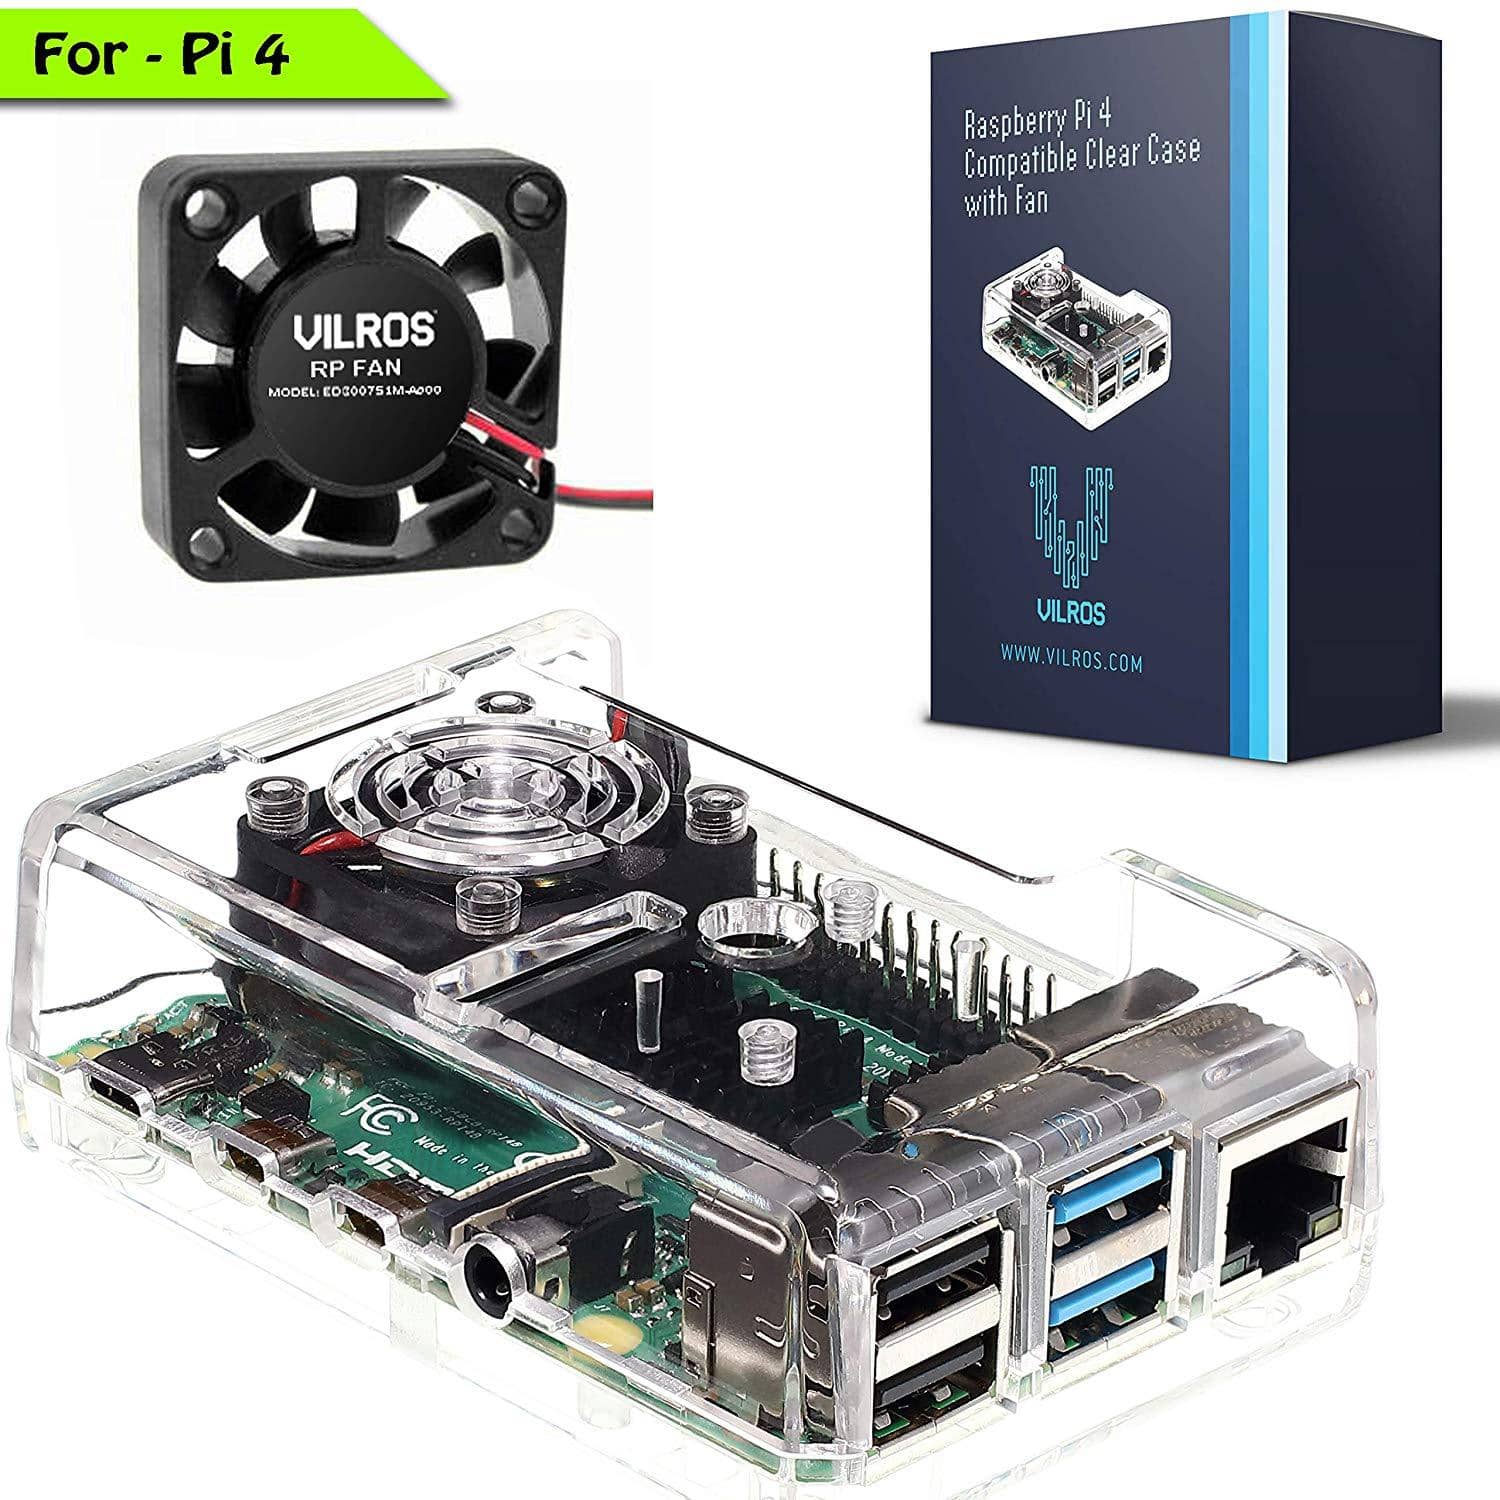 Vilros Raspberry Pi 4 Compatible Case with Built in Fan